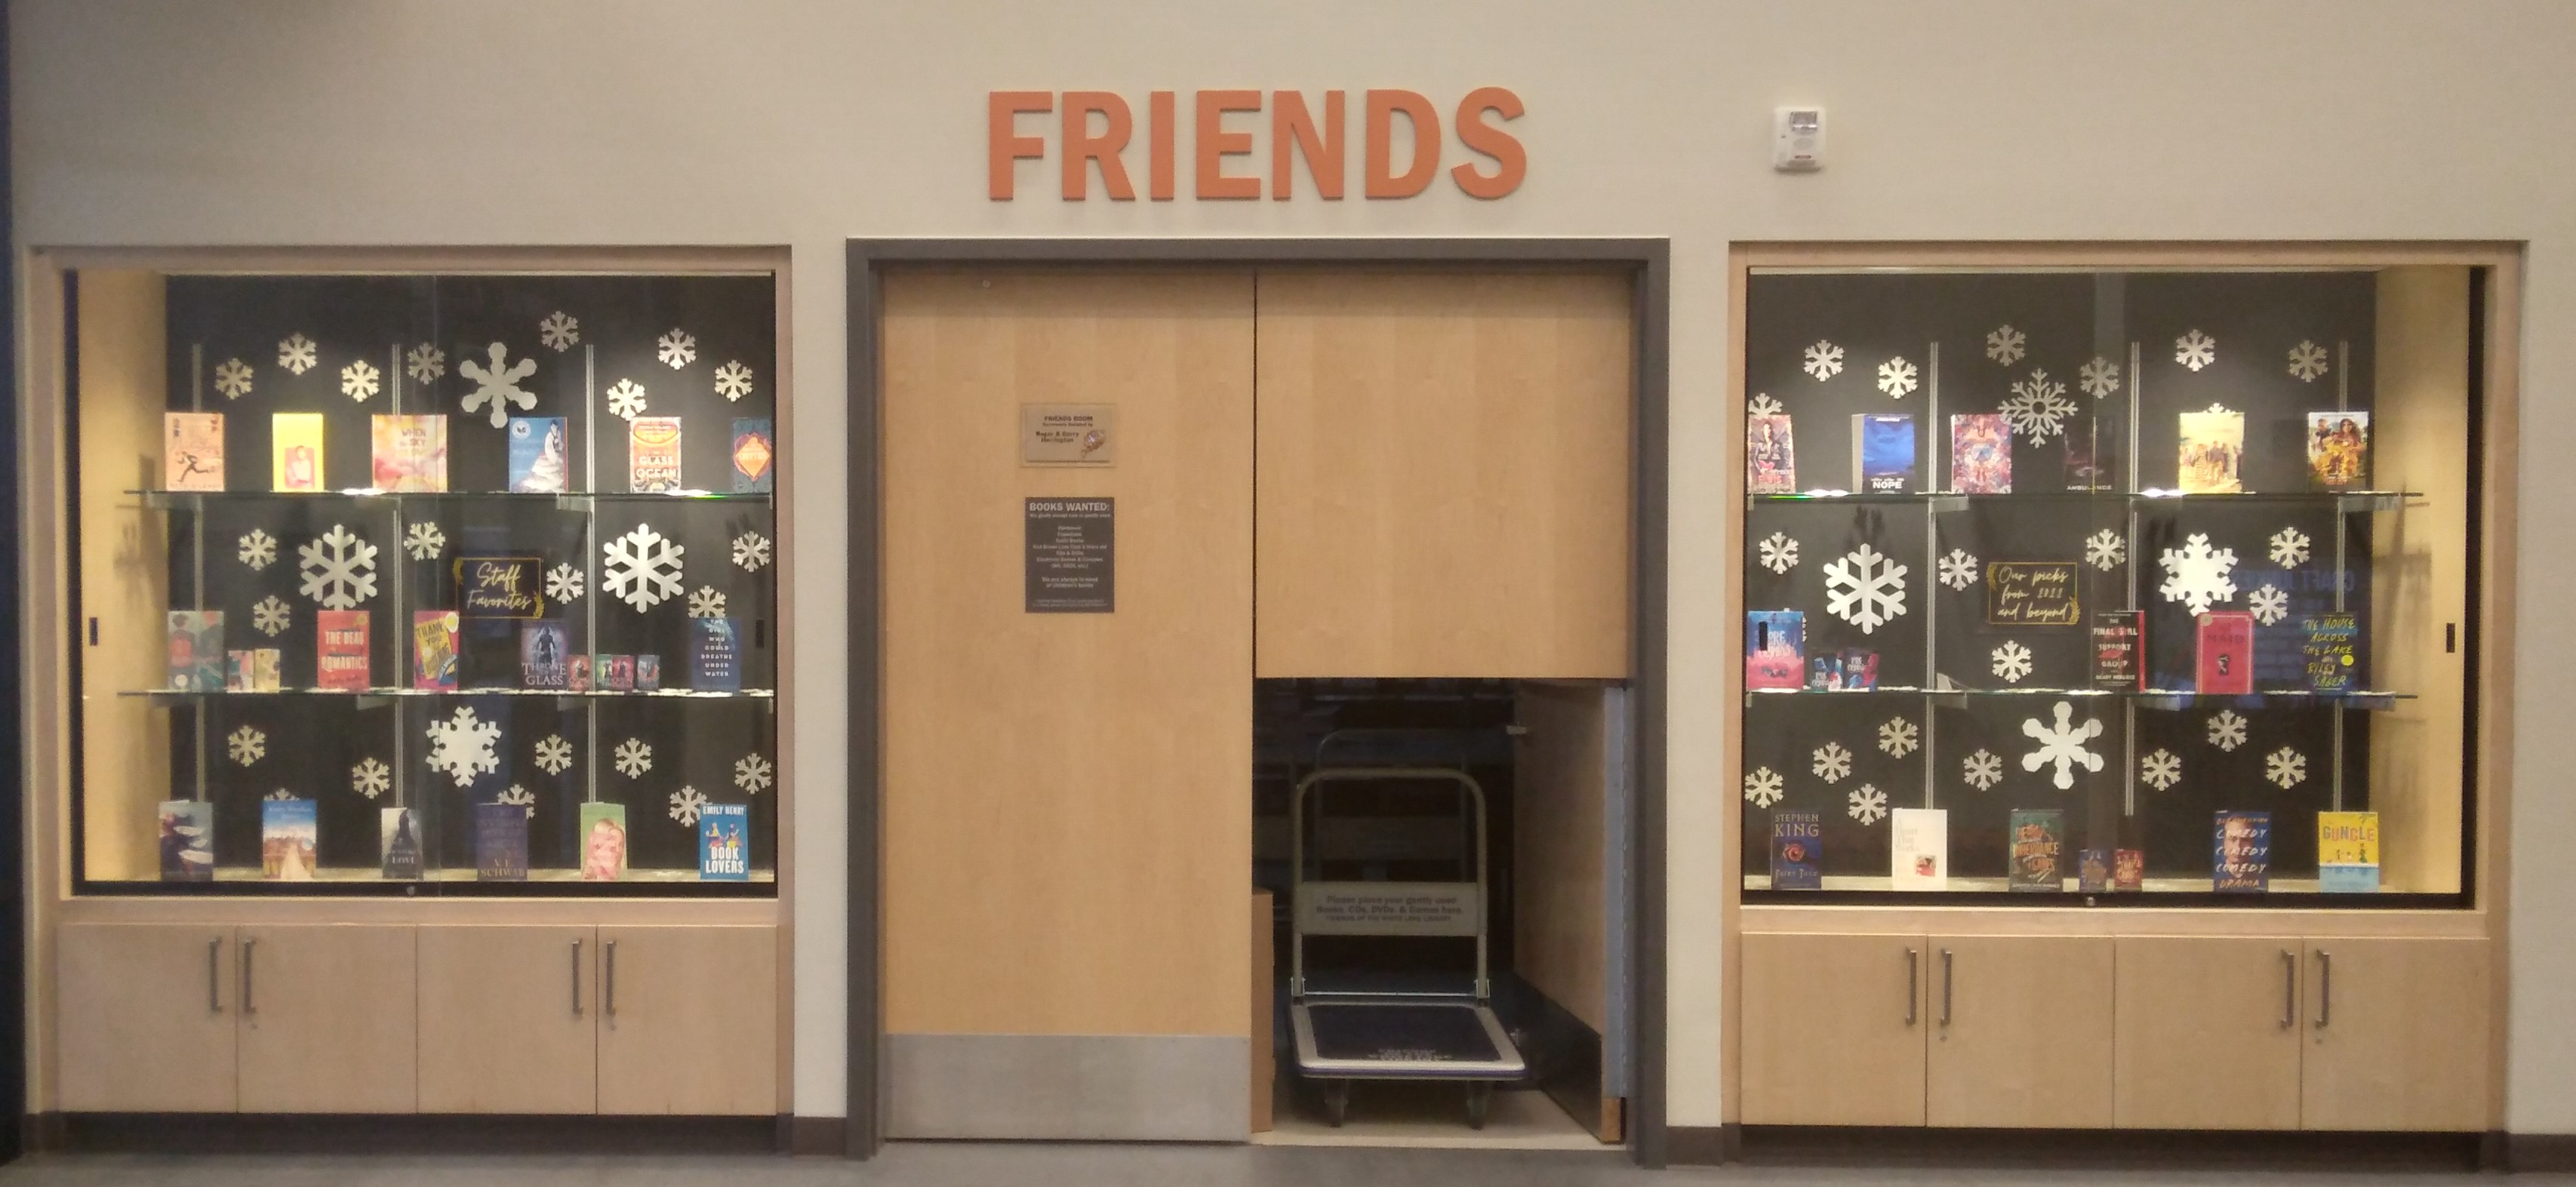 Image of Friends Room door with book cart visible and displays on each side